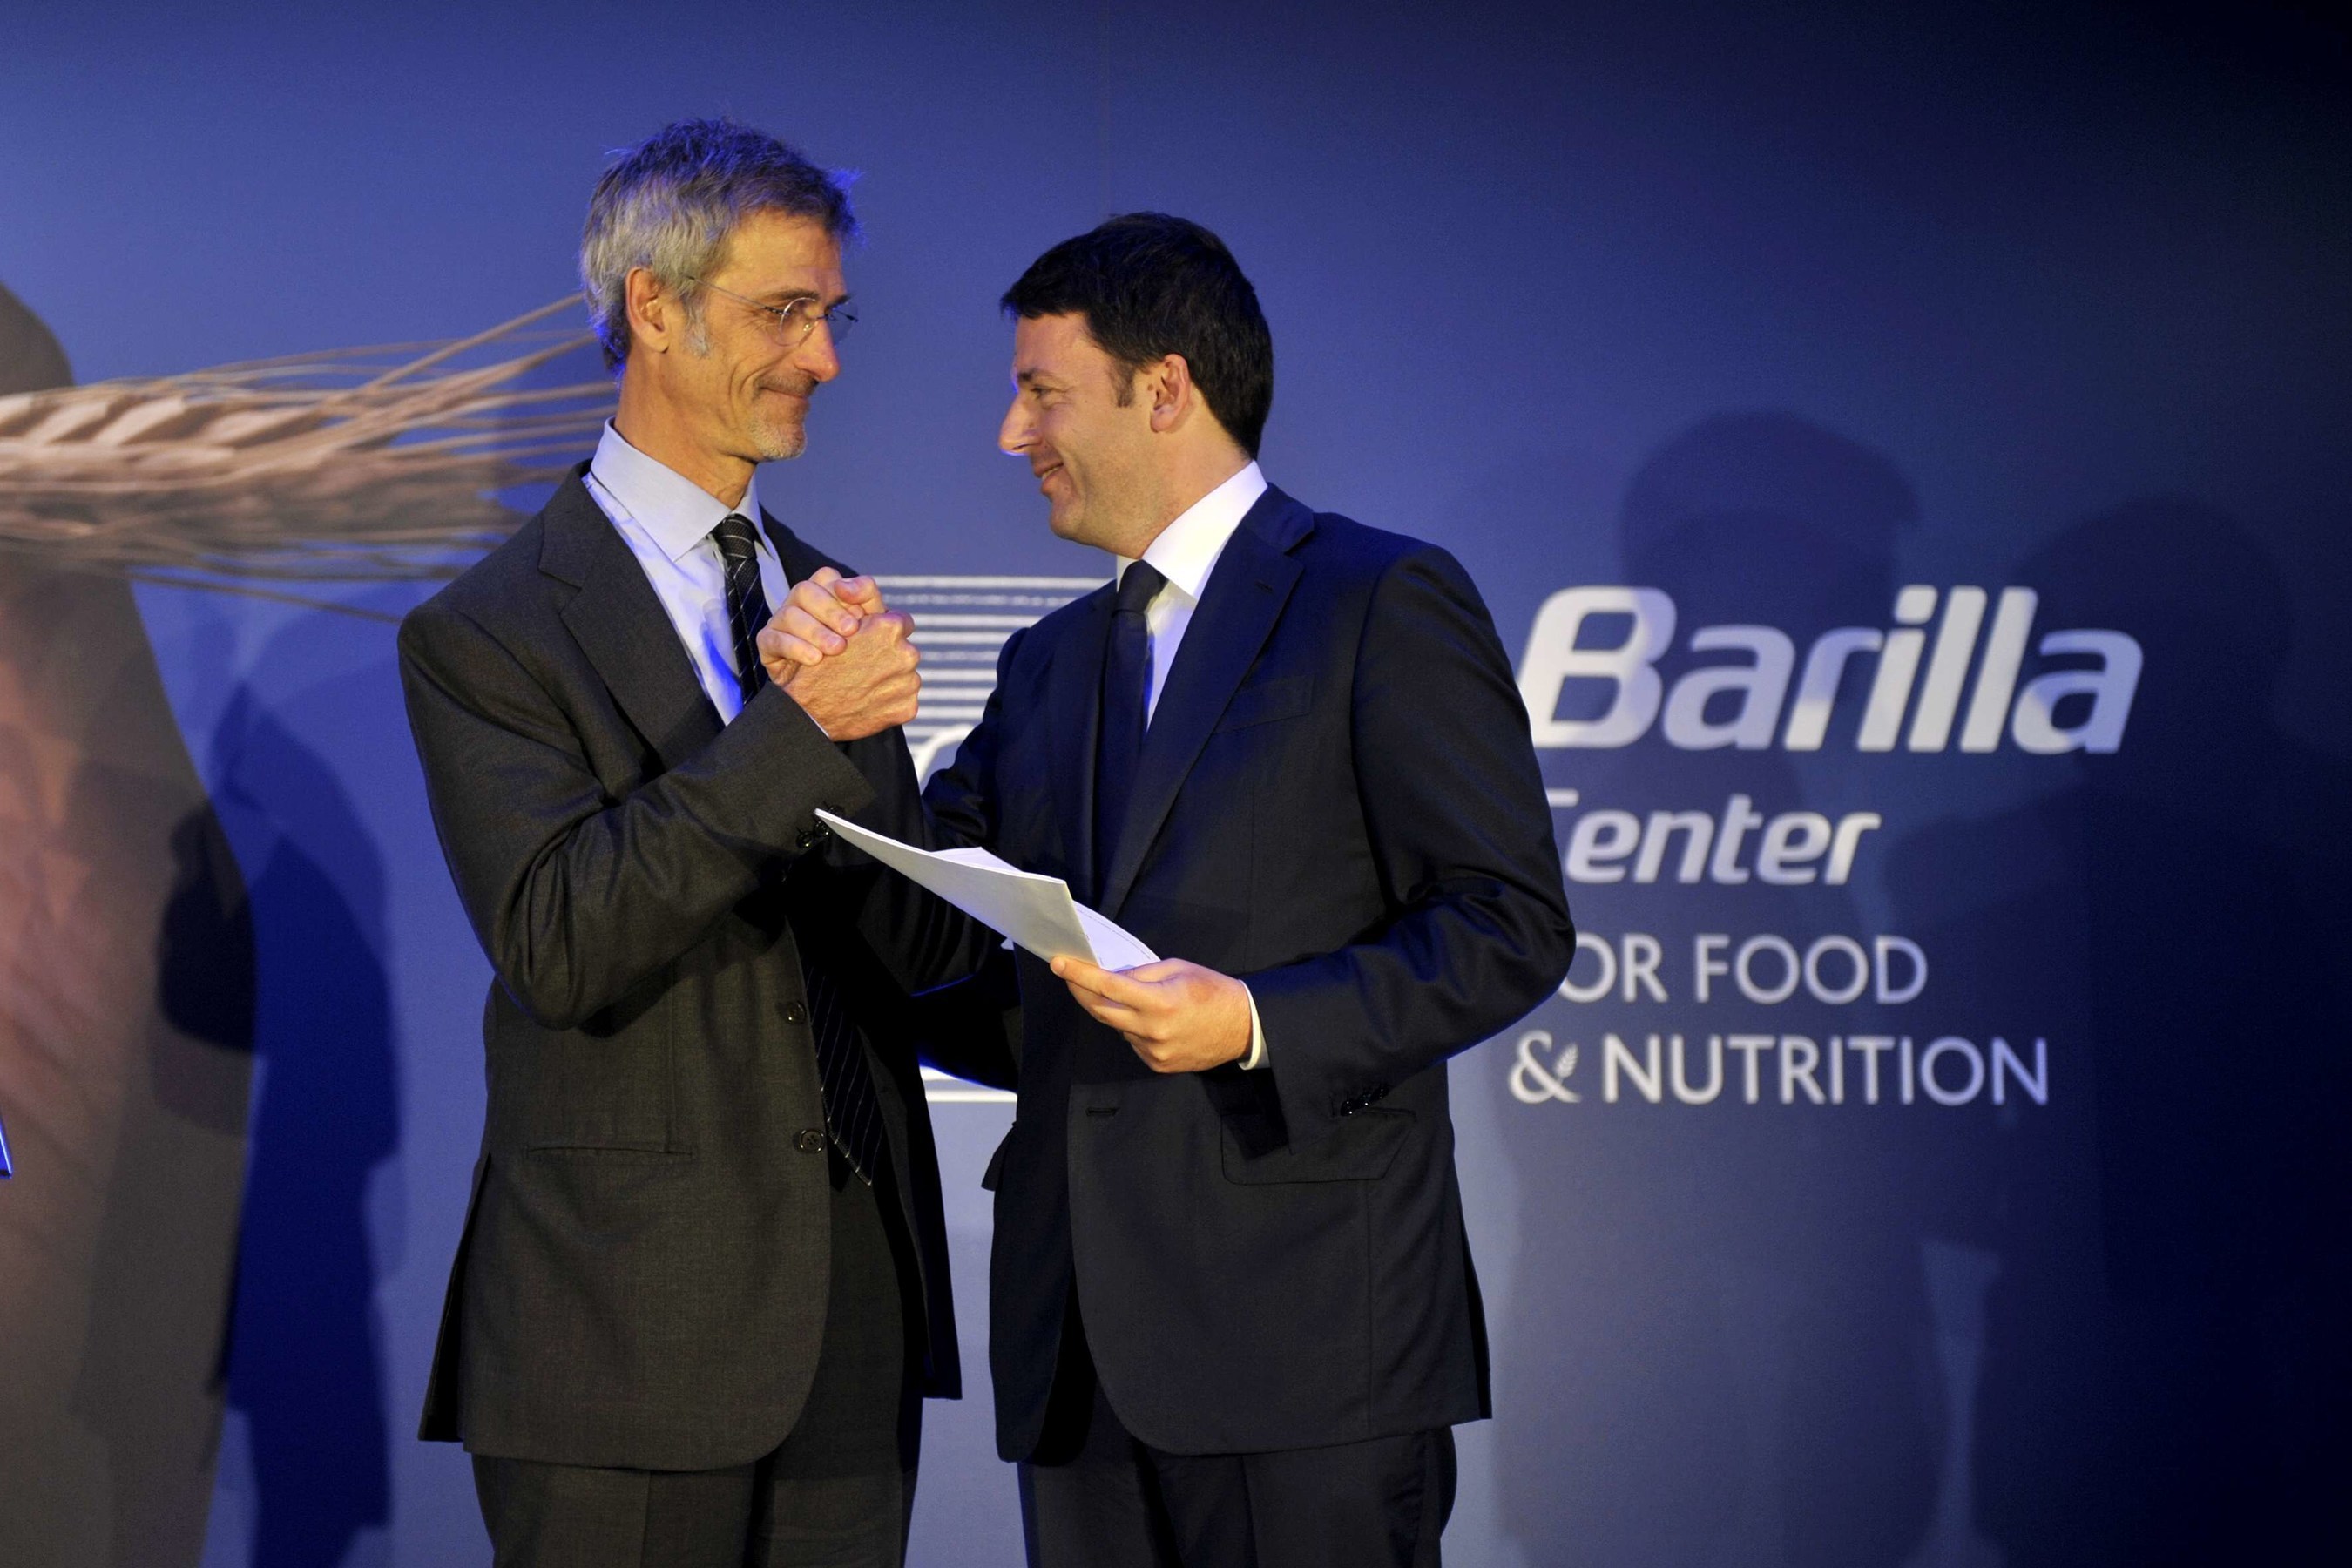 Italian Prime Minister Matteo Renzi and Barilla Center for Food and Nutrition President Guido Barilla demonstrate their support for the Milan Protocol, which aims to raise awareness for challenges facing the global food system, including: the reduction of food waste, the promotion of sustainable agriculture, and the war on hunger and obesity.